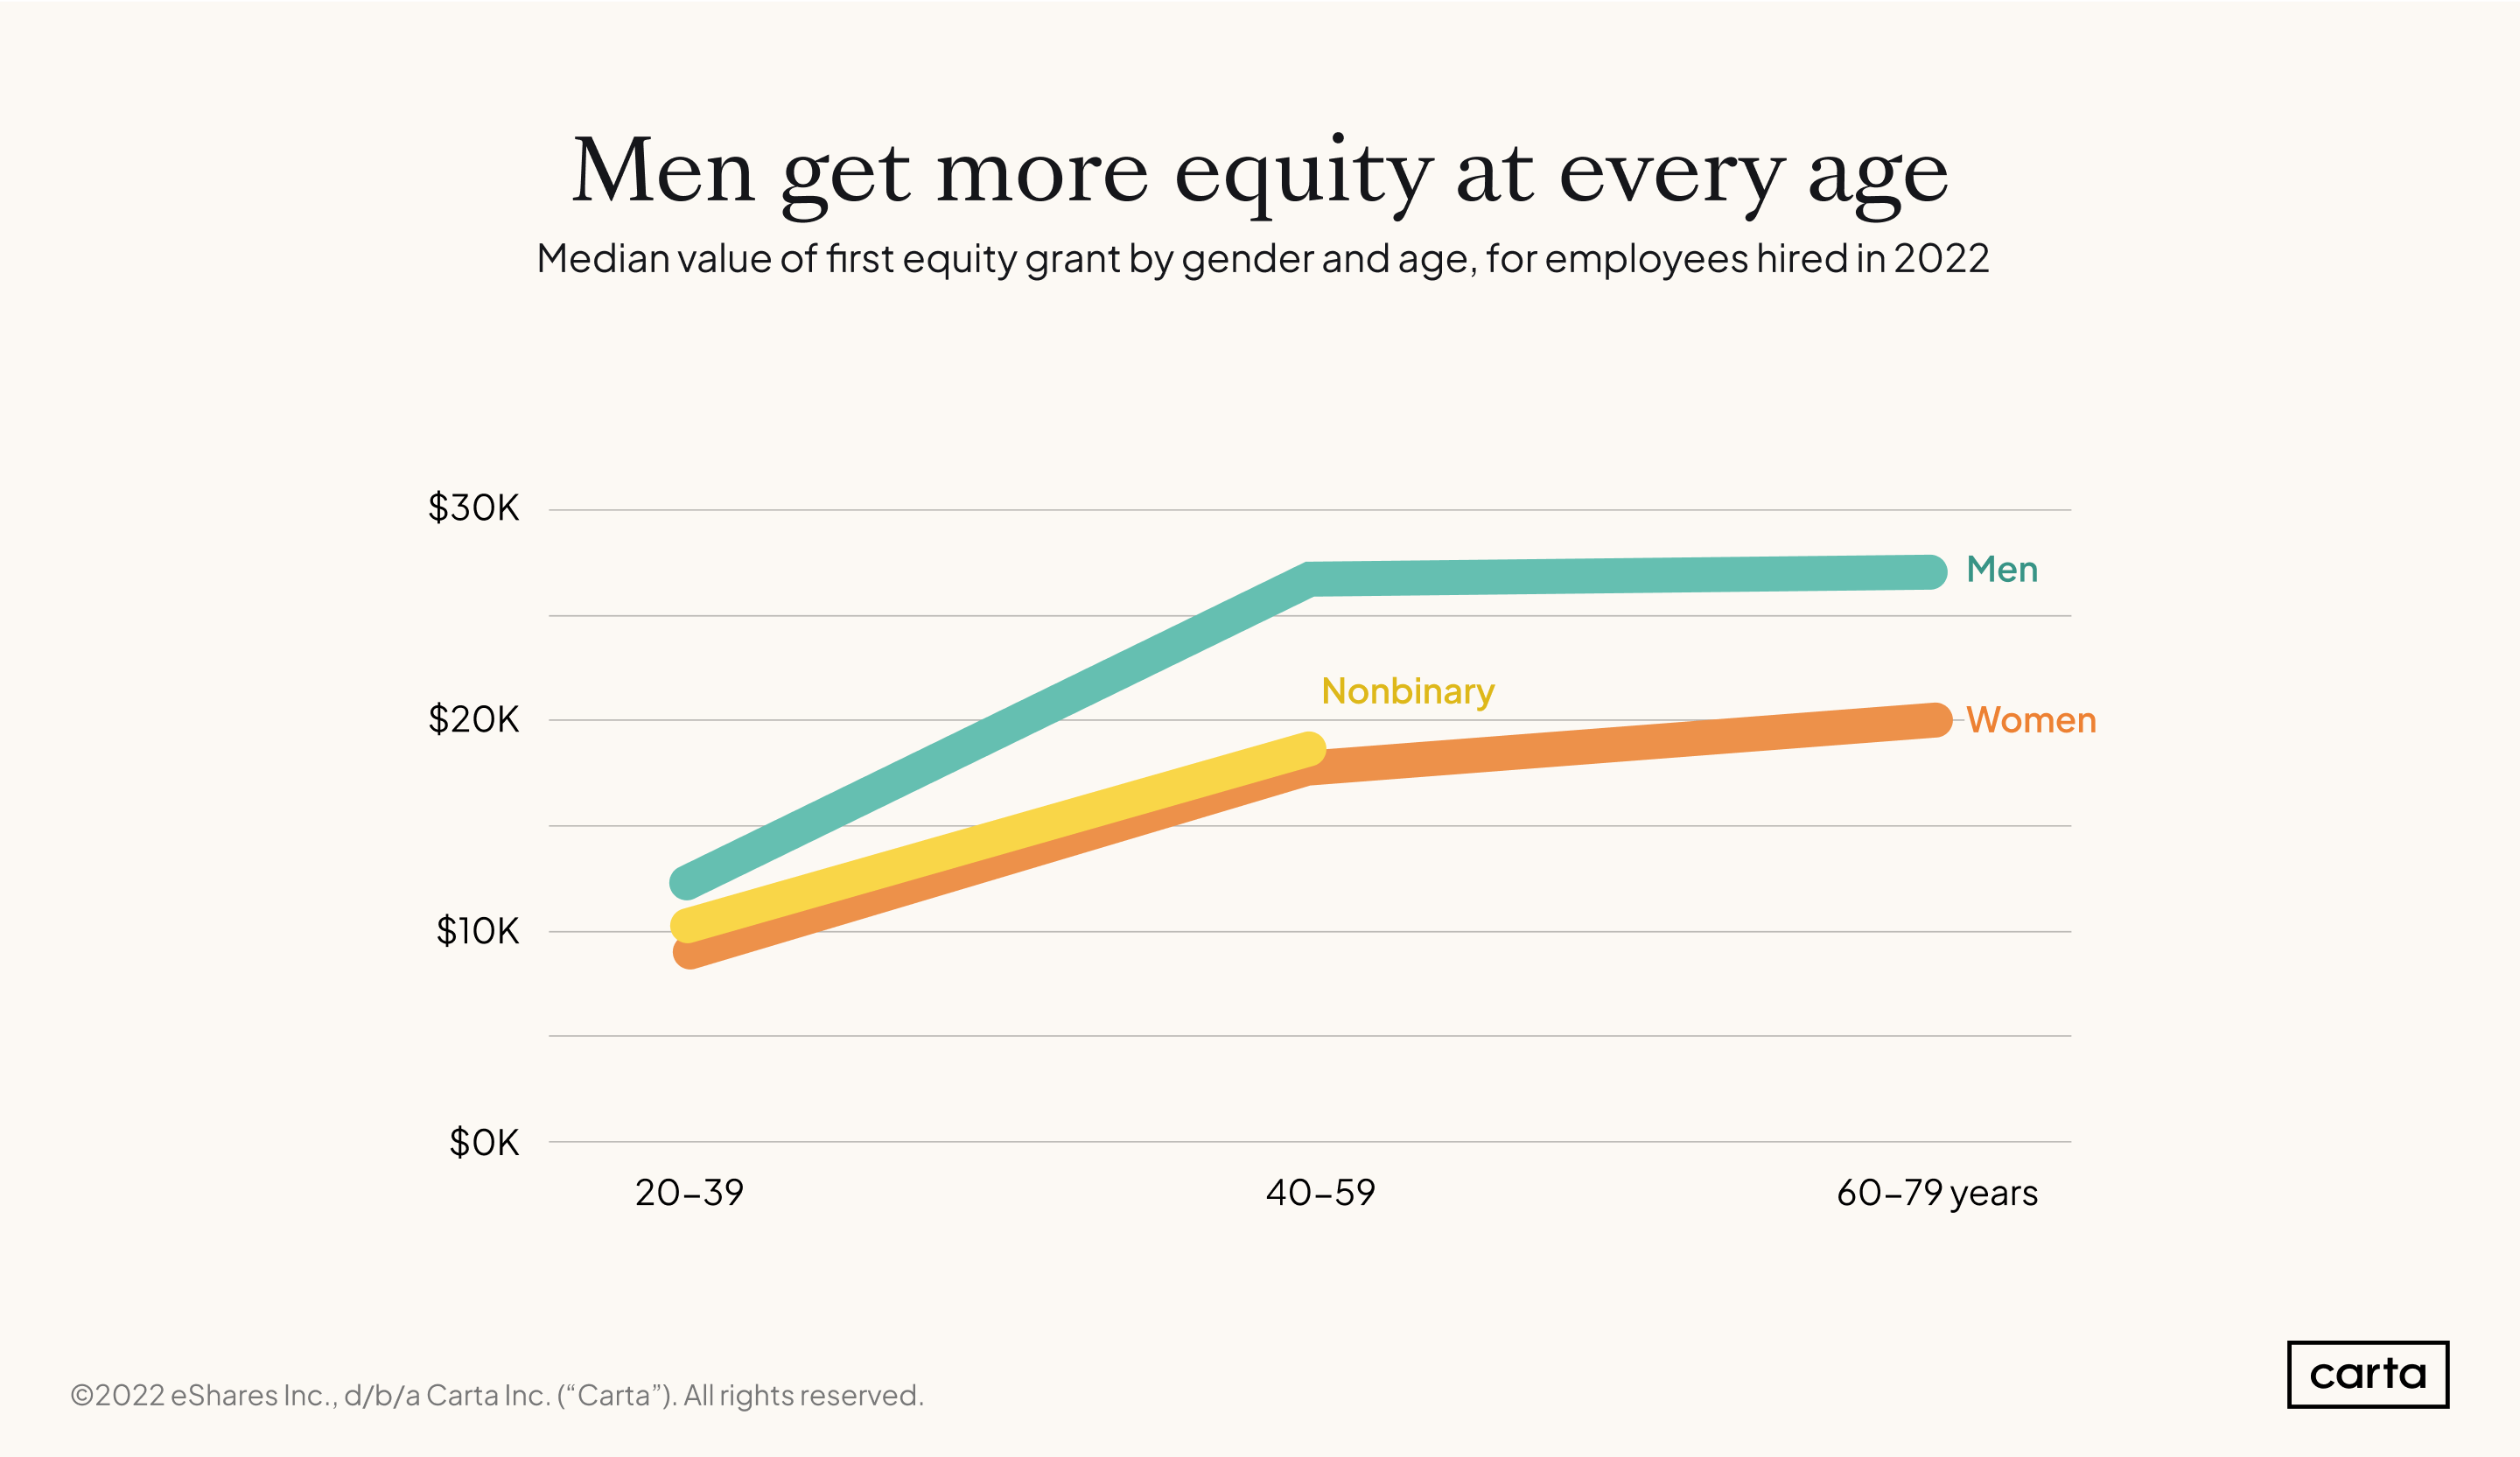 CES Equity by age and gender